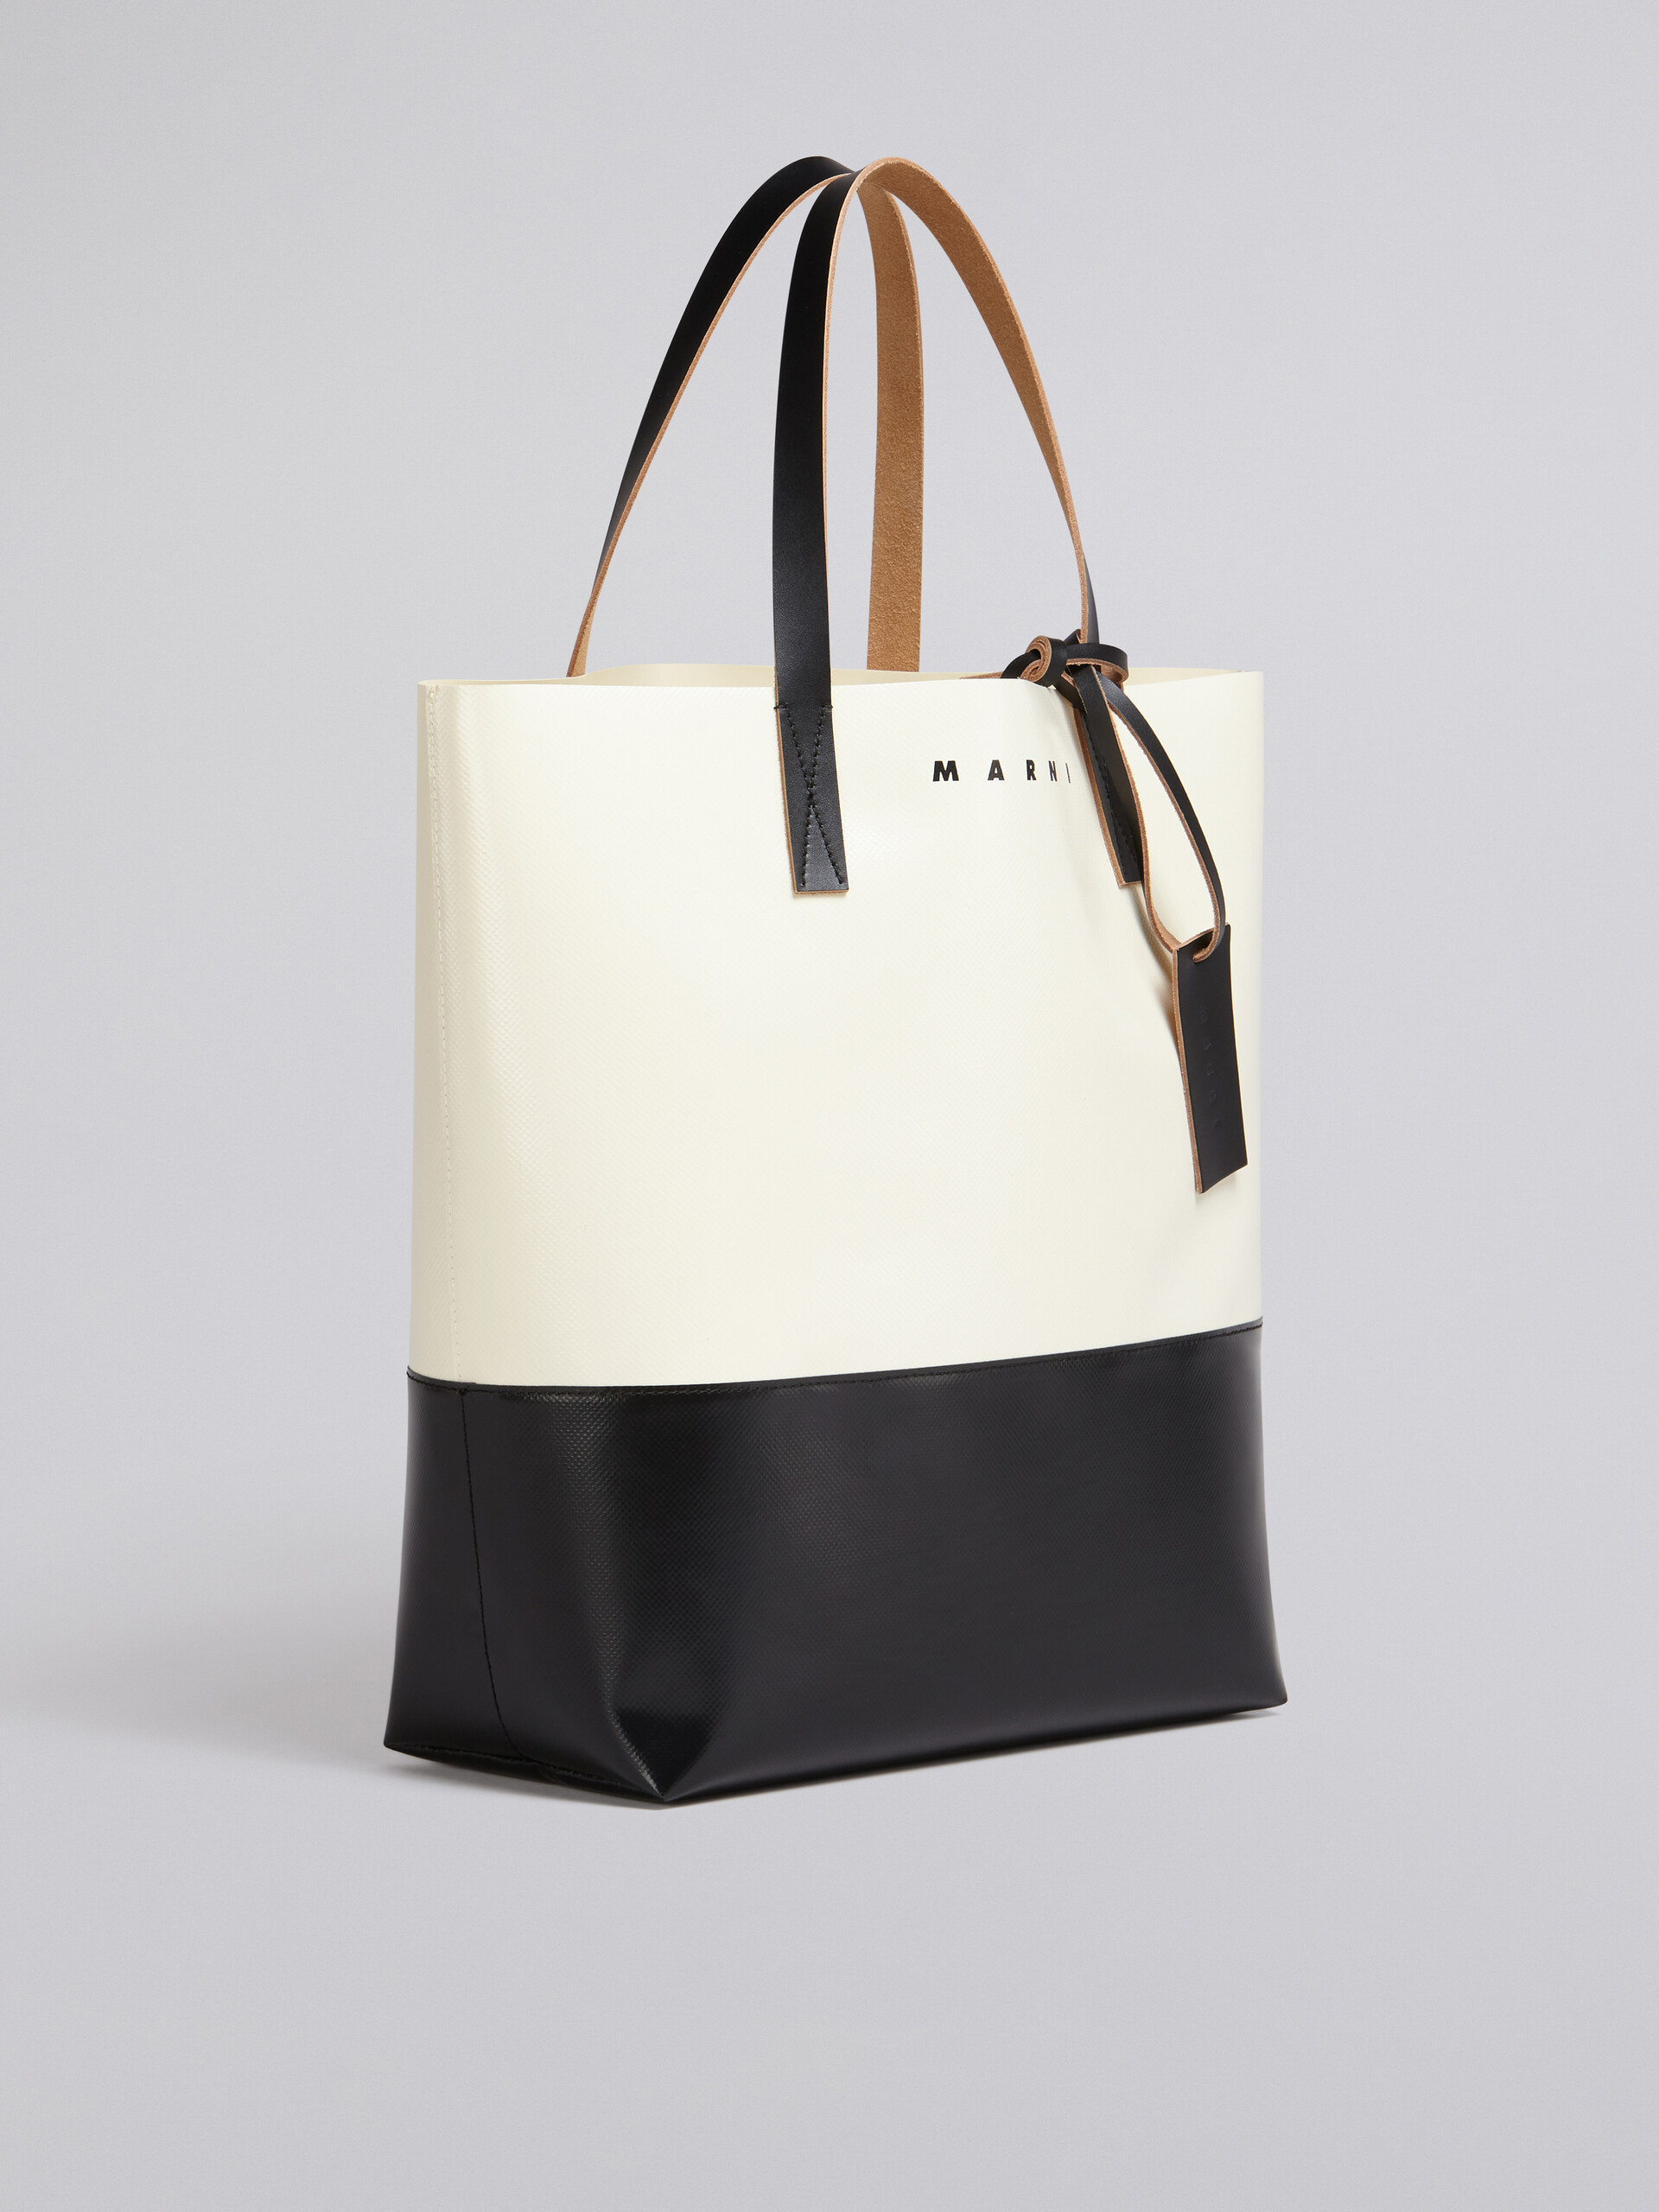 Tribeca shopping bag in white and black - Shopping Bags - Image 6